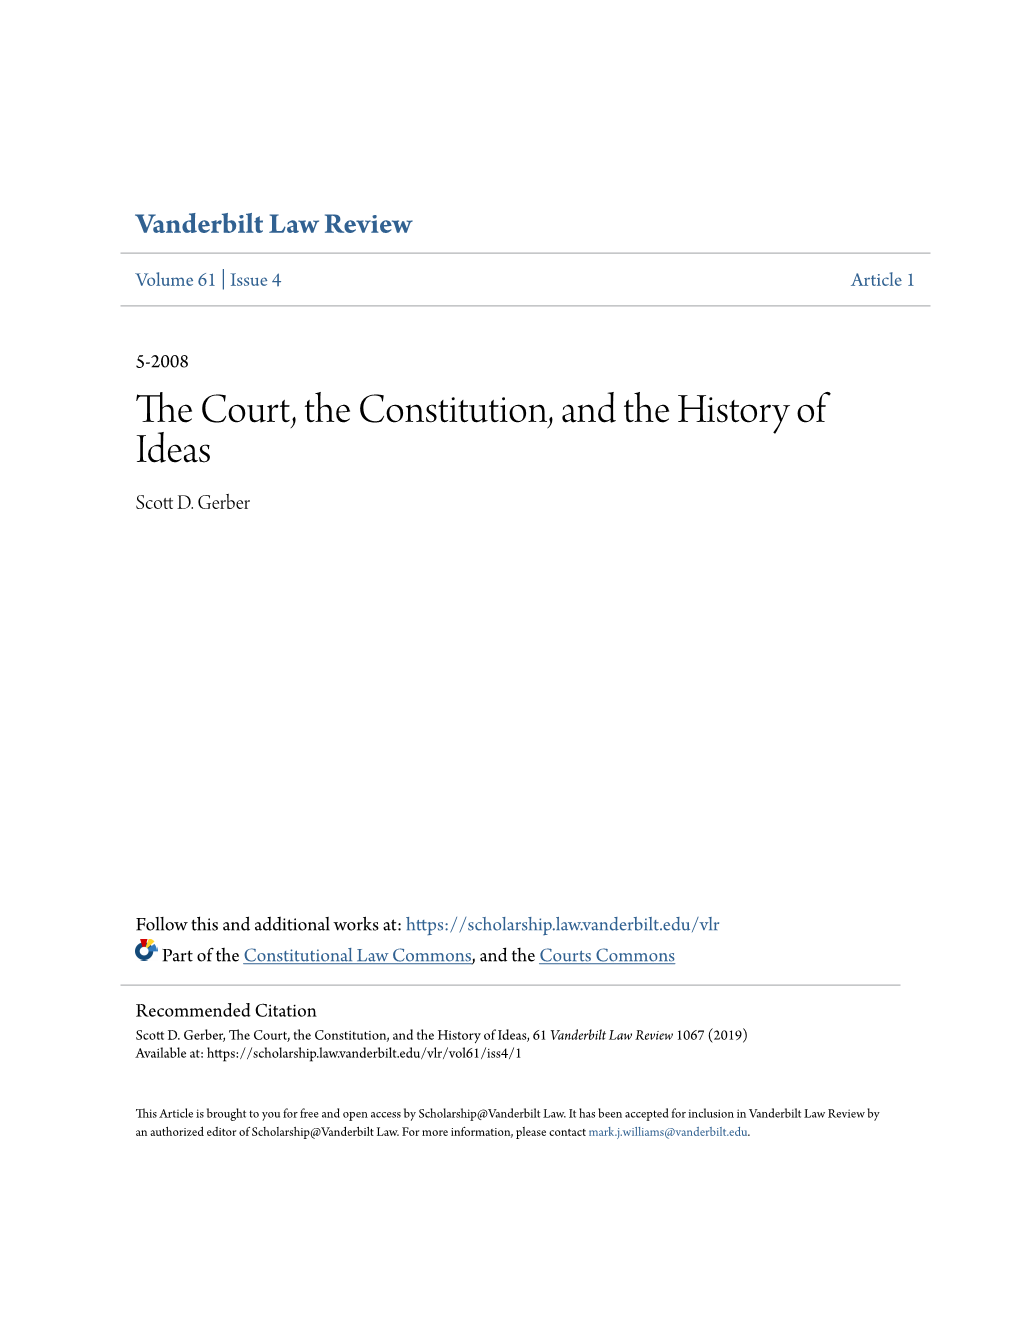 The Court, the Constitution, and the History of Ideas